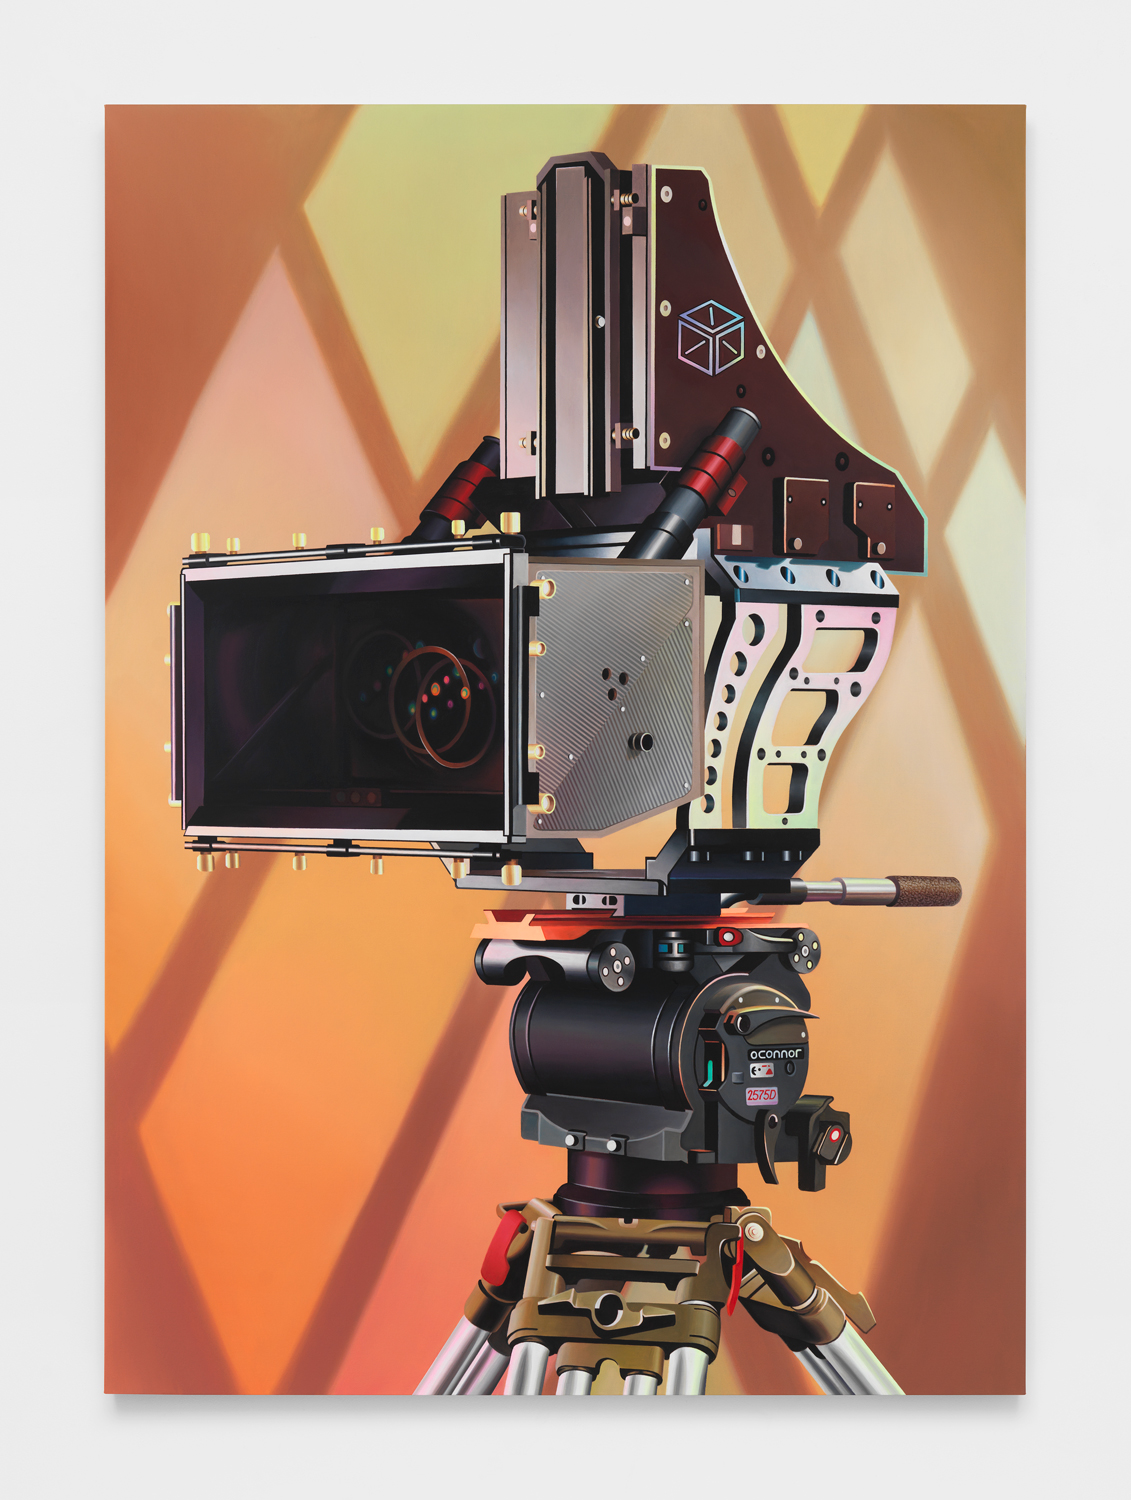 Chason Matthams, Untitled (Technica 3D rig, yellow), 2024, Oil on linen, 84 x 60 in.